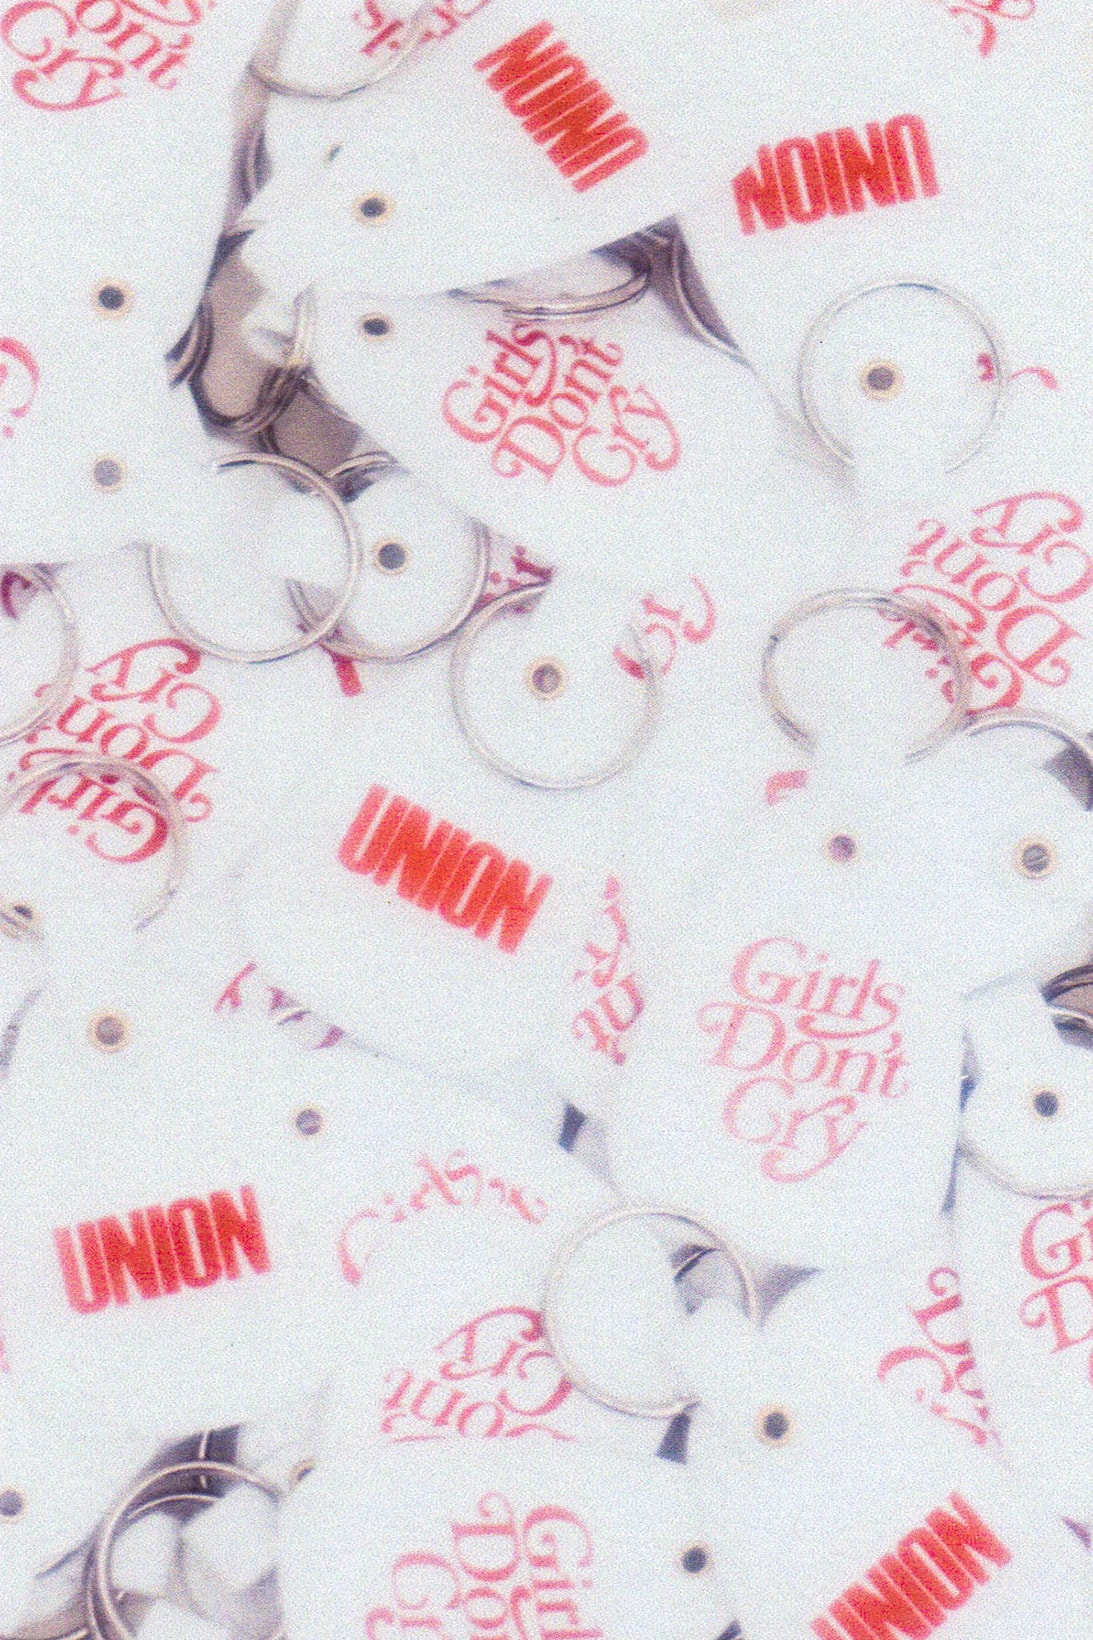 Girls Dont Cry Union Los Angeles Capsule Collection collaboration july 2 2018 release date info drop